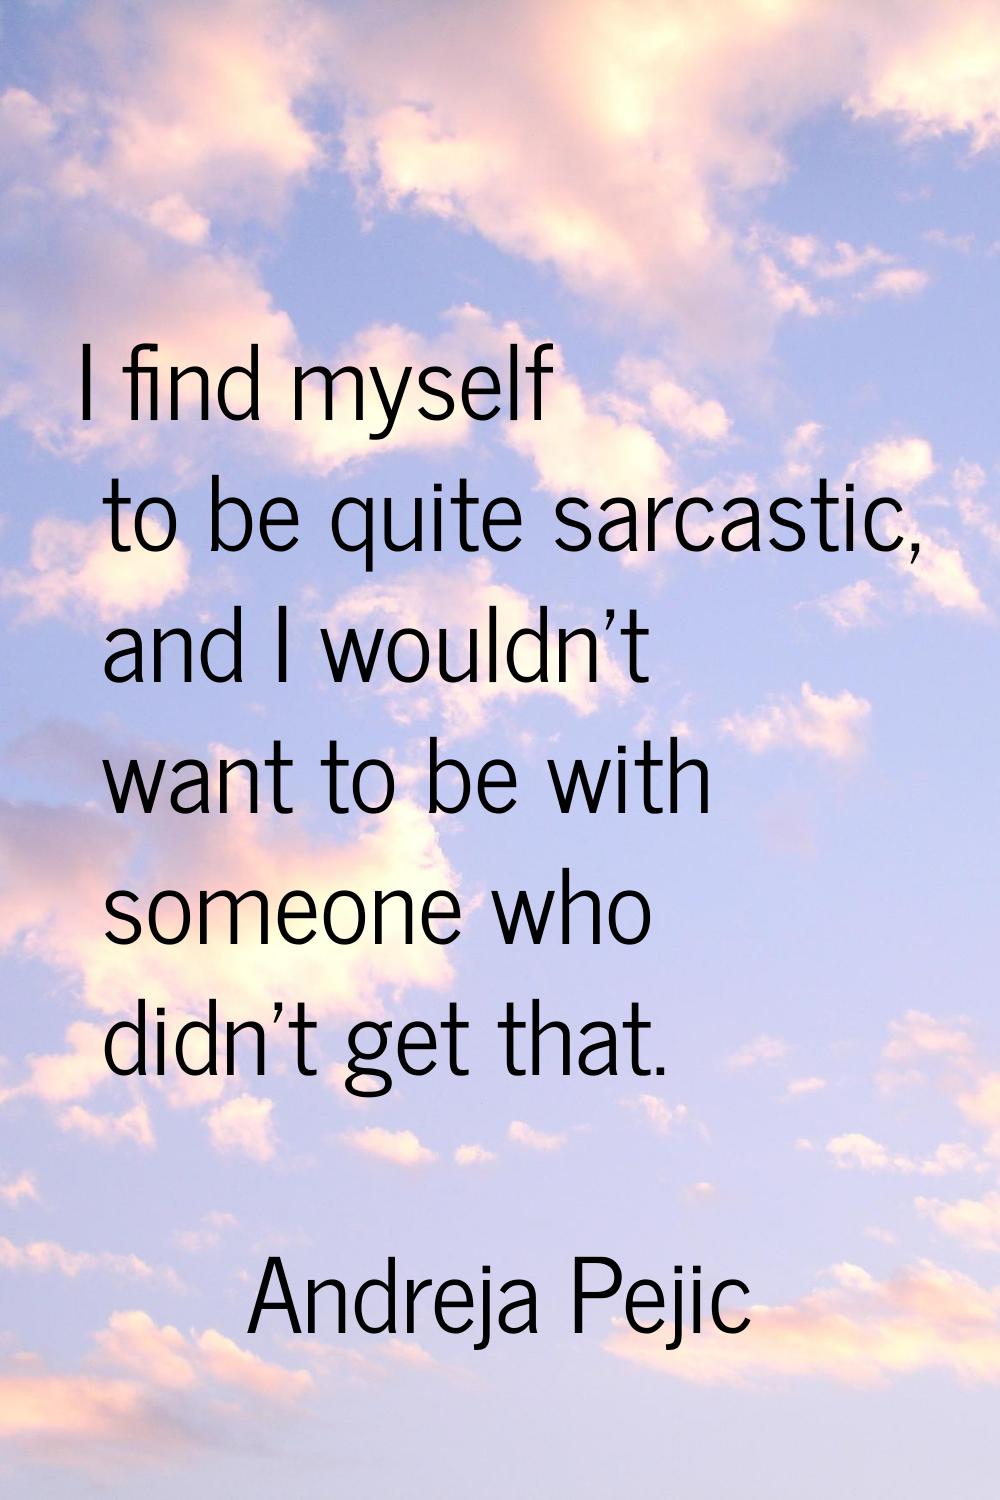 I find myself to be quite sarcastic, and I wouldn't want to be with someone who didn't get that.